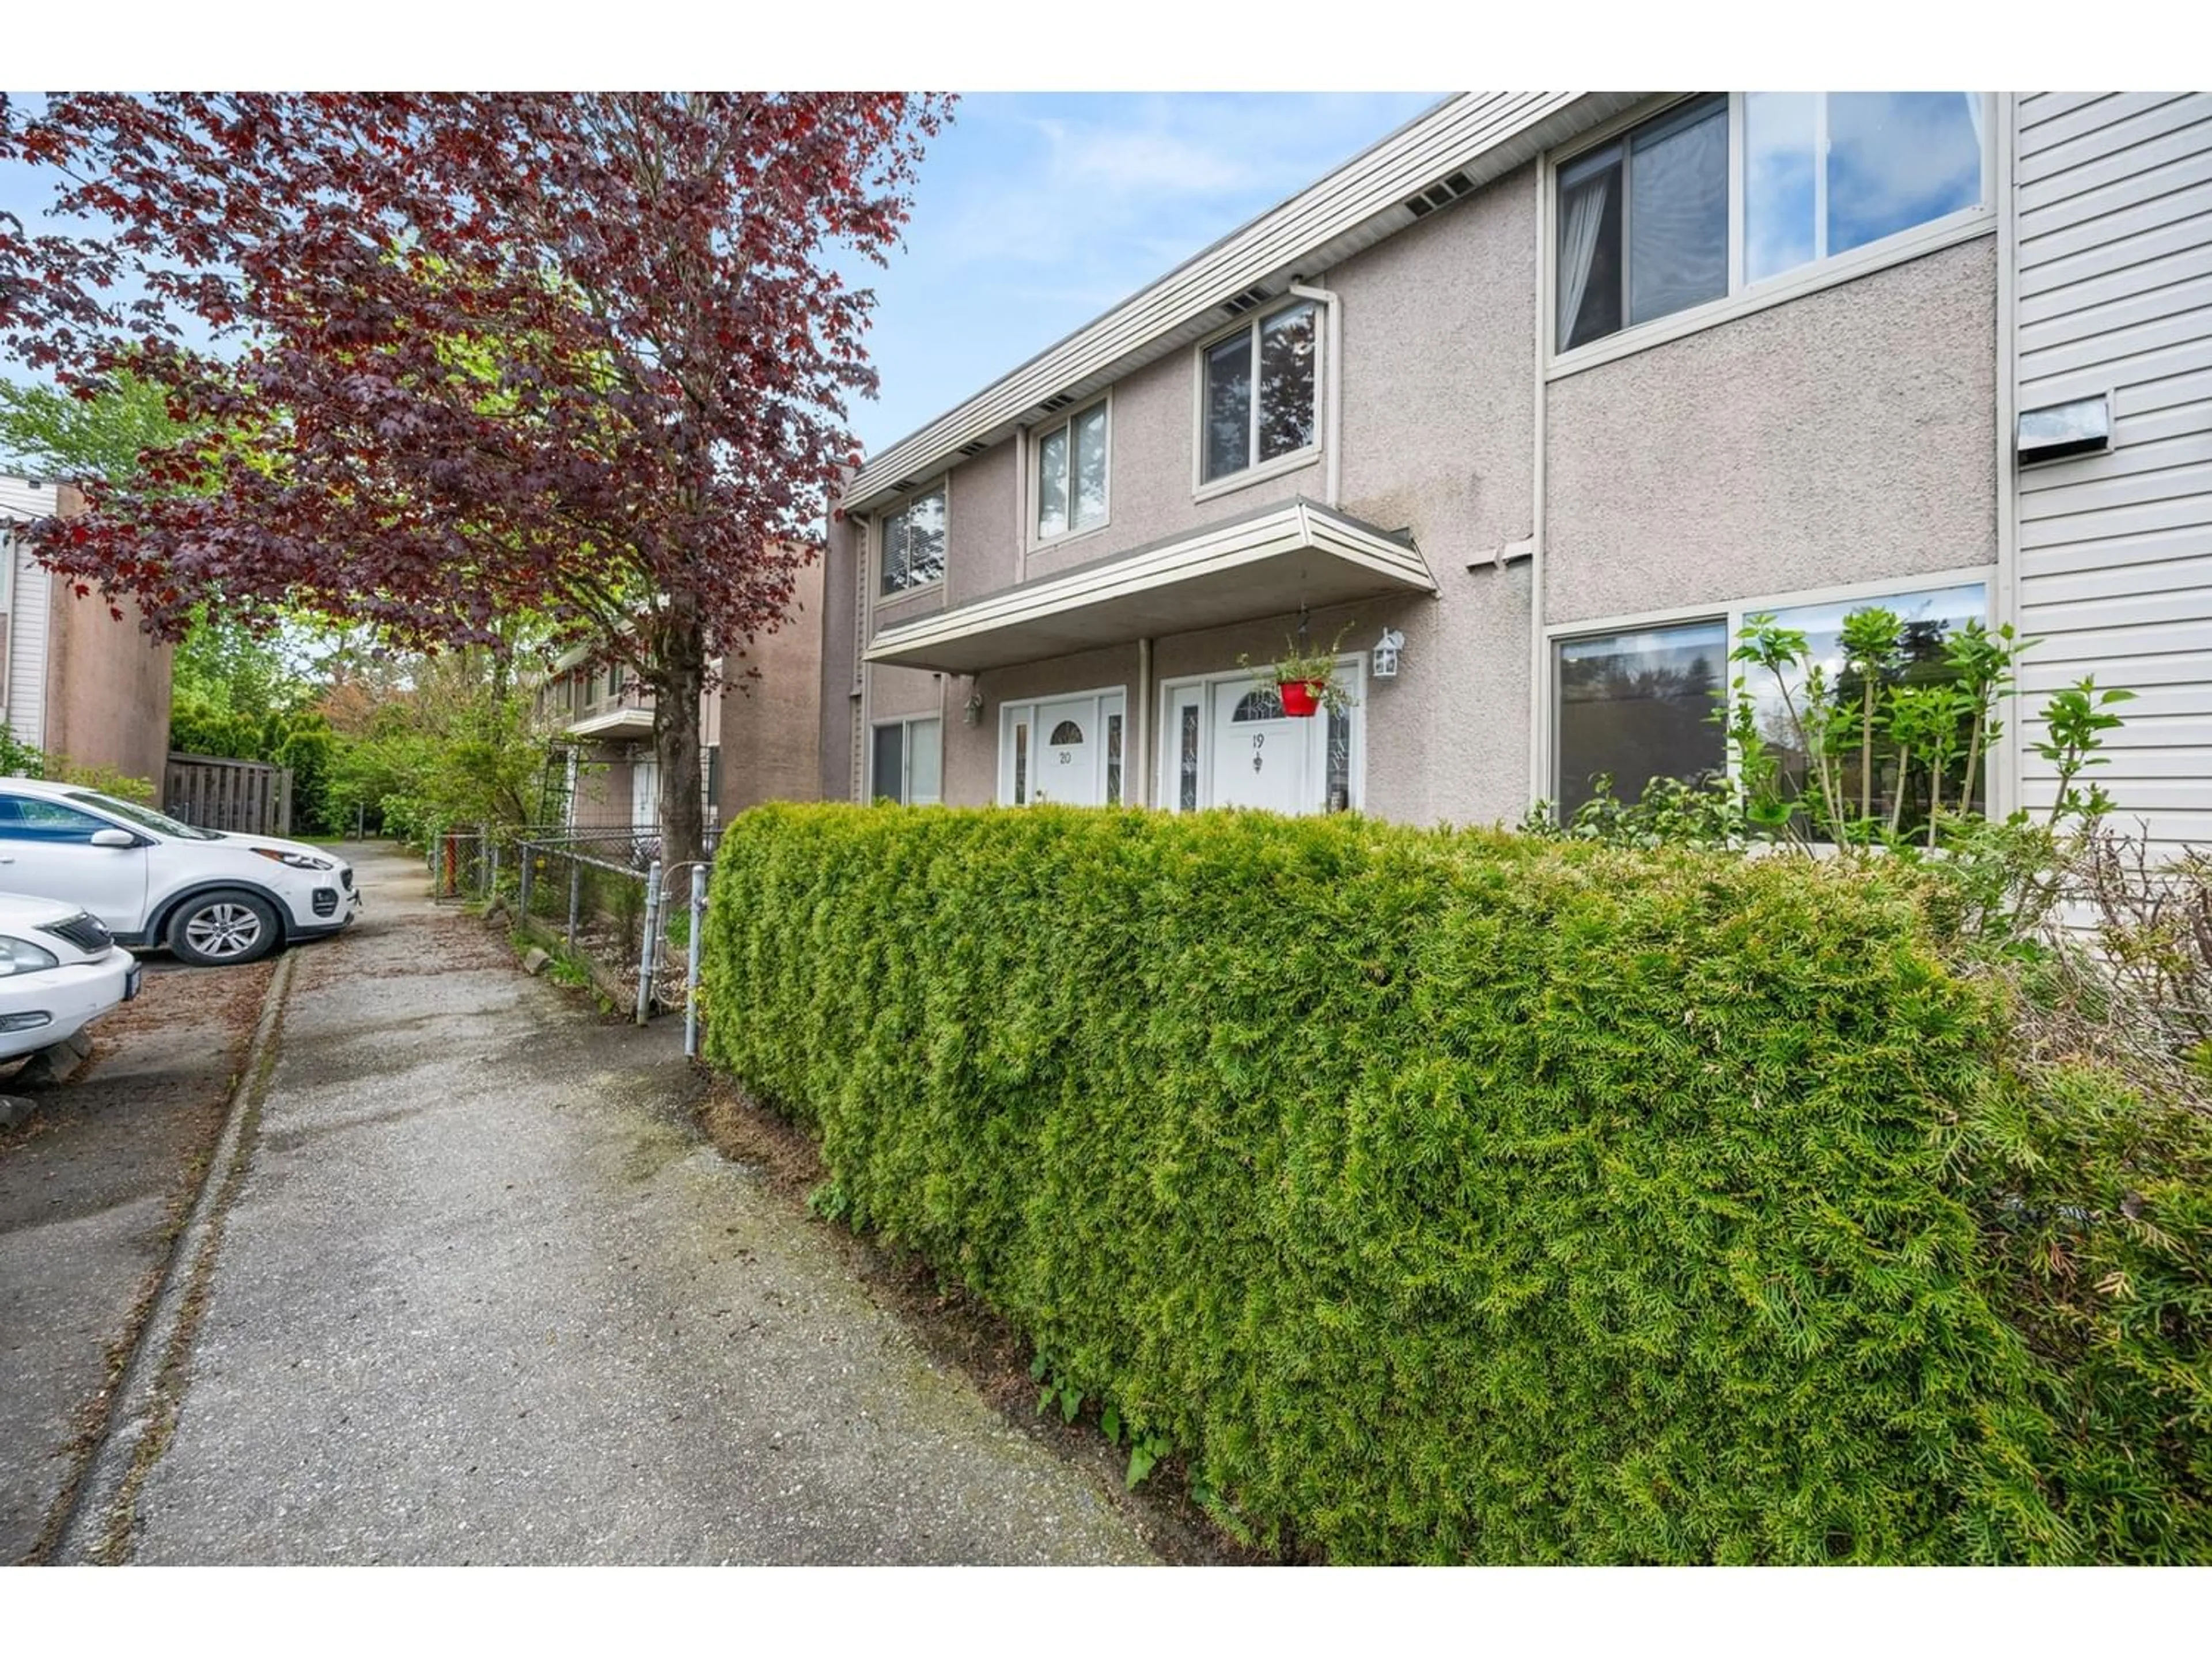 A pic from exterior of the house or condo for 19 27090 32 AVENUE, Langley British Columbia V4W3T7